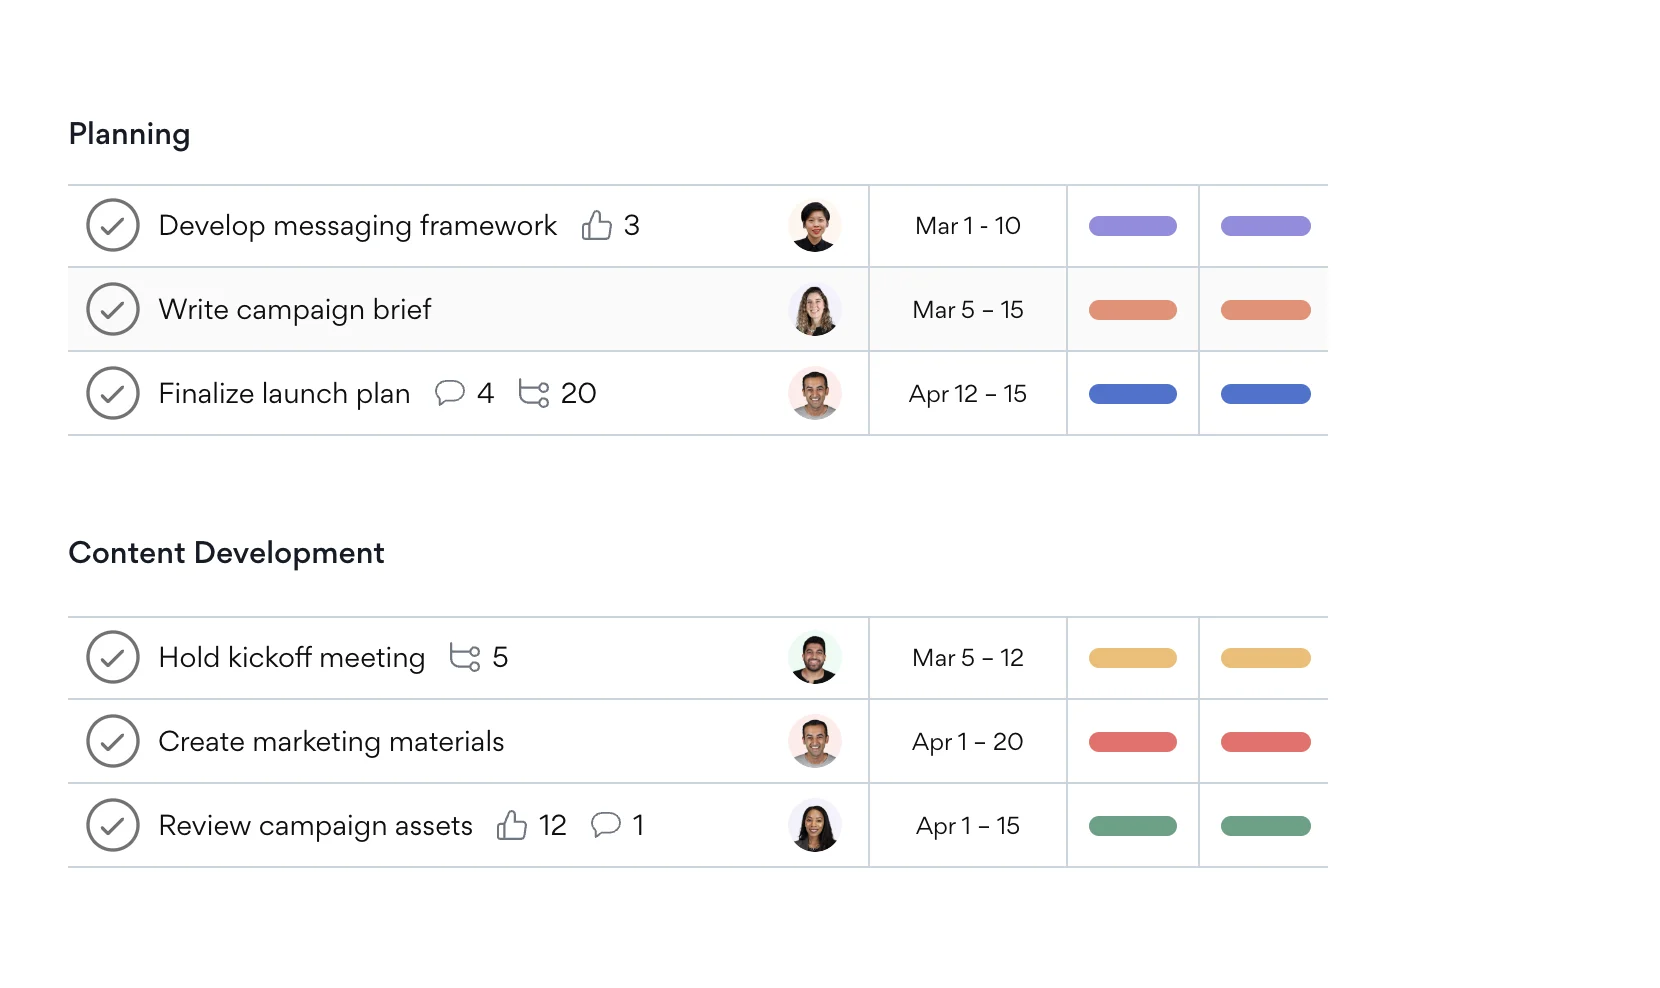 Asana, Planning and Content Development Tasks, with Assignee, Due Dates and Other Details